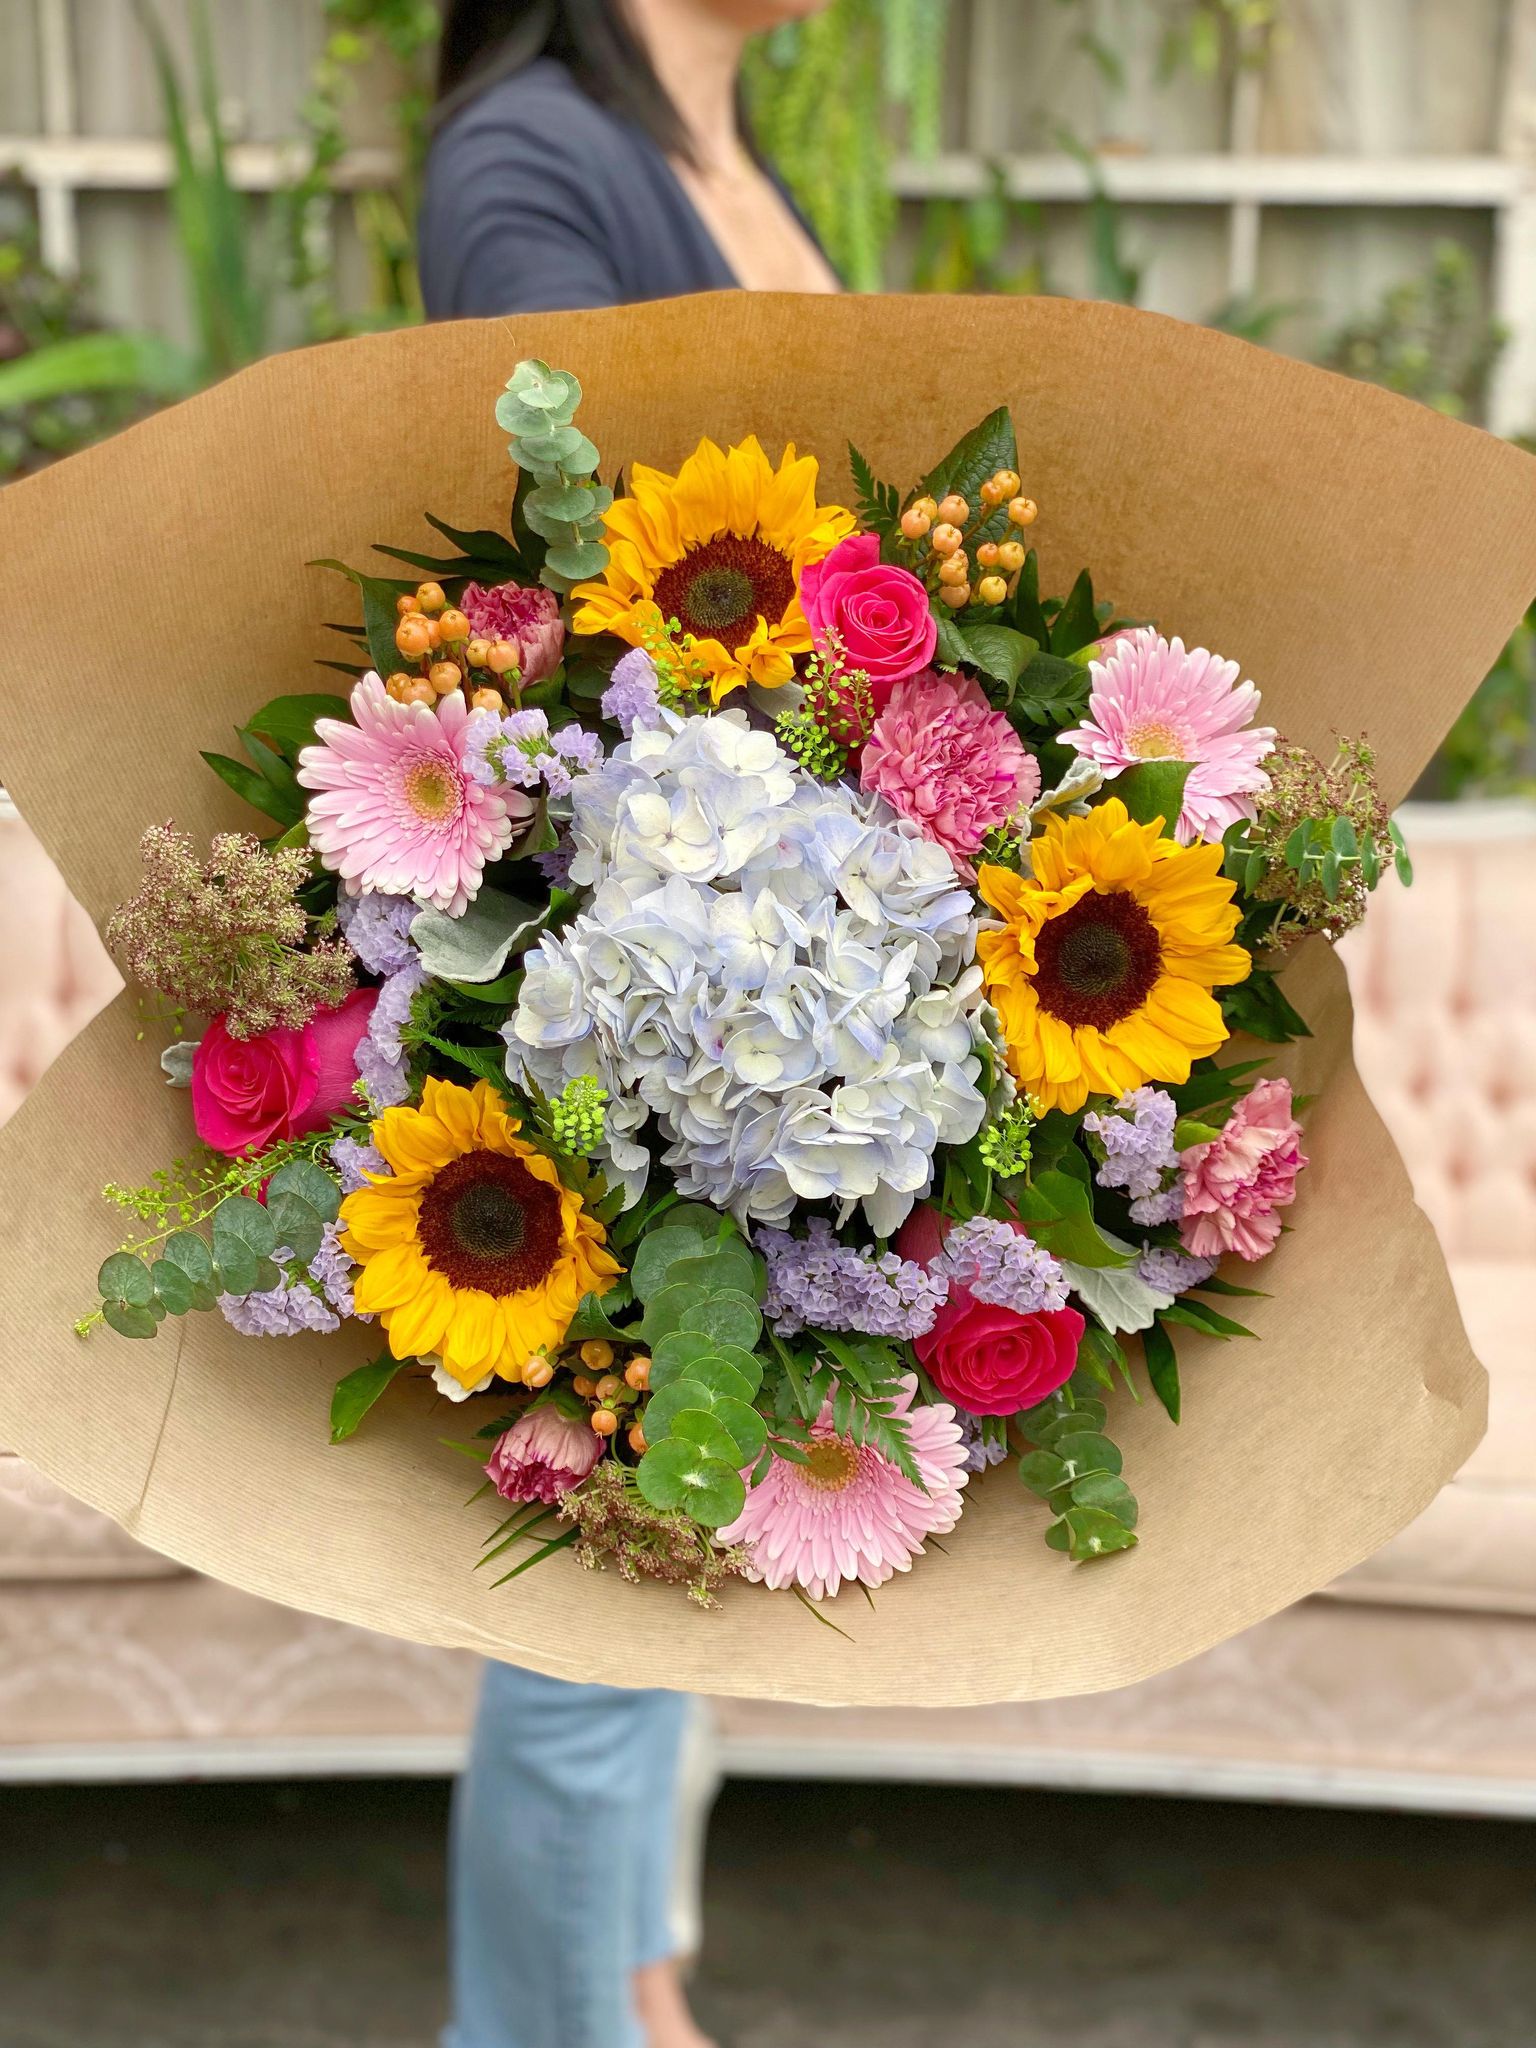 The Watering Can | A lage gardeny hand-tied bouquet with lavender hydranea, sunflowers, roses, and gerberas.